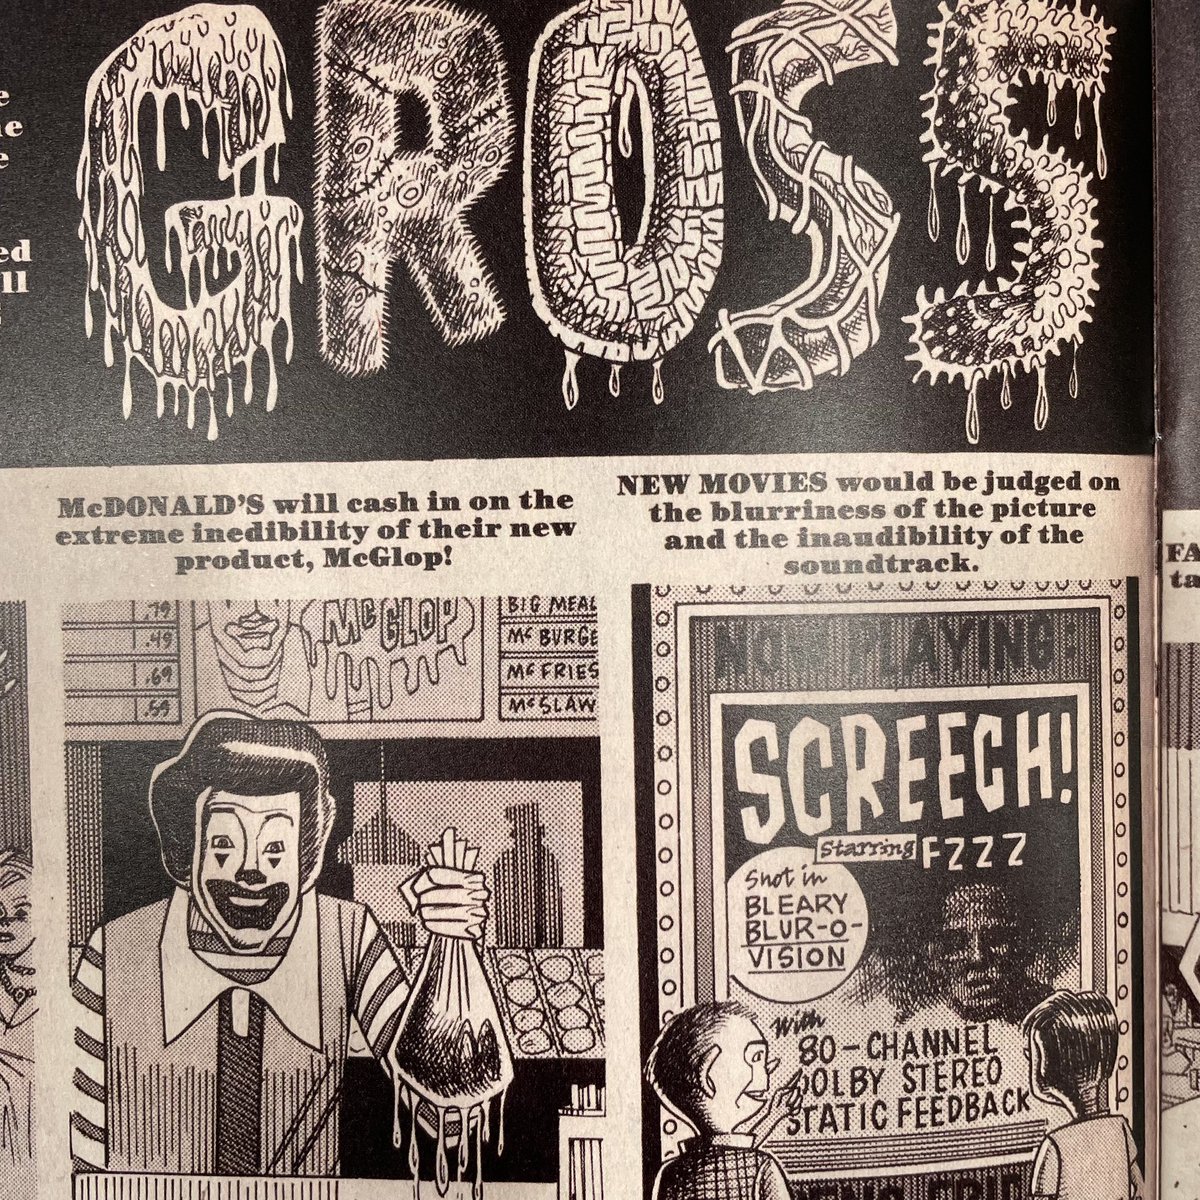 I finished my Cracked Dan Clowes collection this year and made a bootleg book of it. We looked at it on @CartoonKayfabe so you can enjoy it too. BOOTLEG! Dan Clowes Complete CRACKED Comics featuring the UGGLY FAMILY youtu.be/hXUQOww4Itc